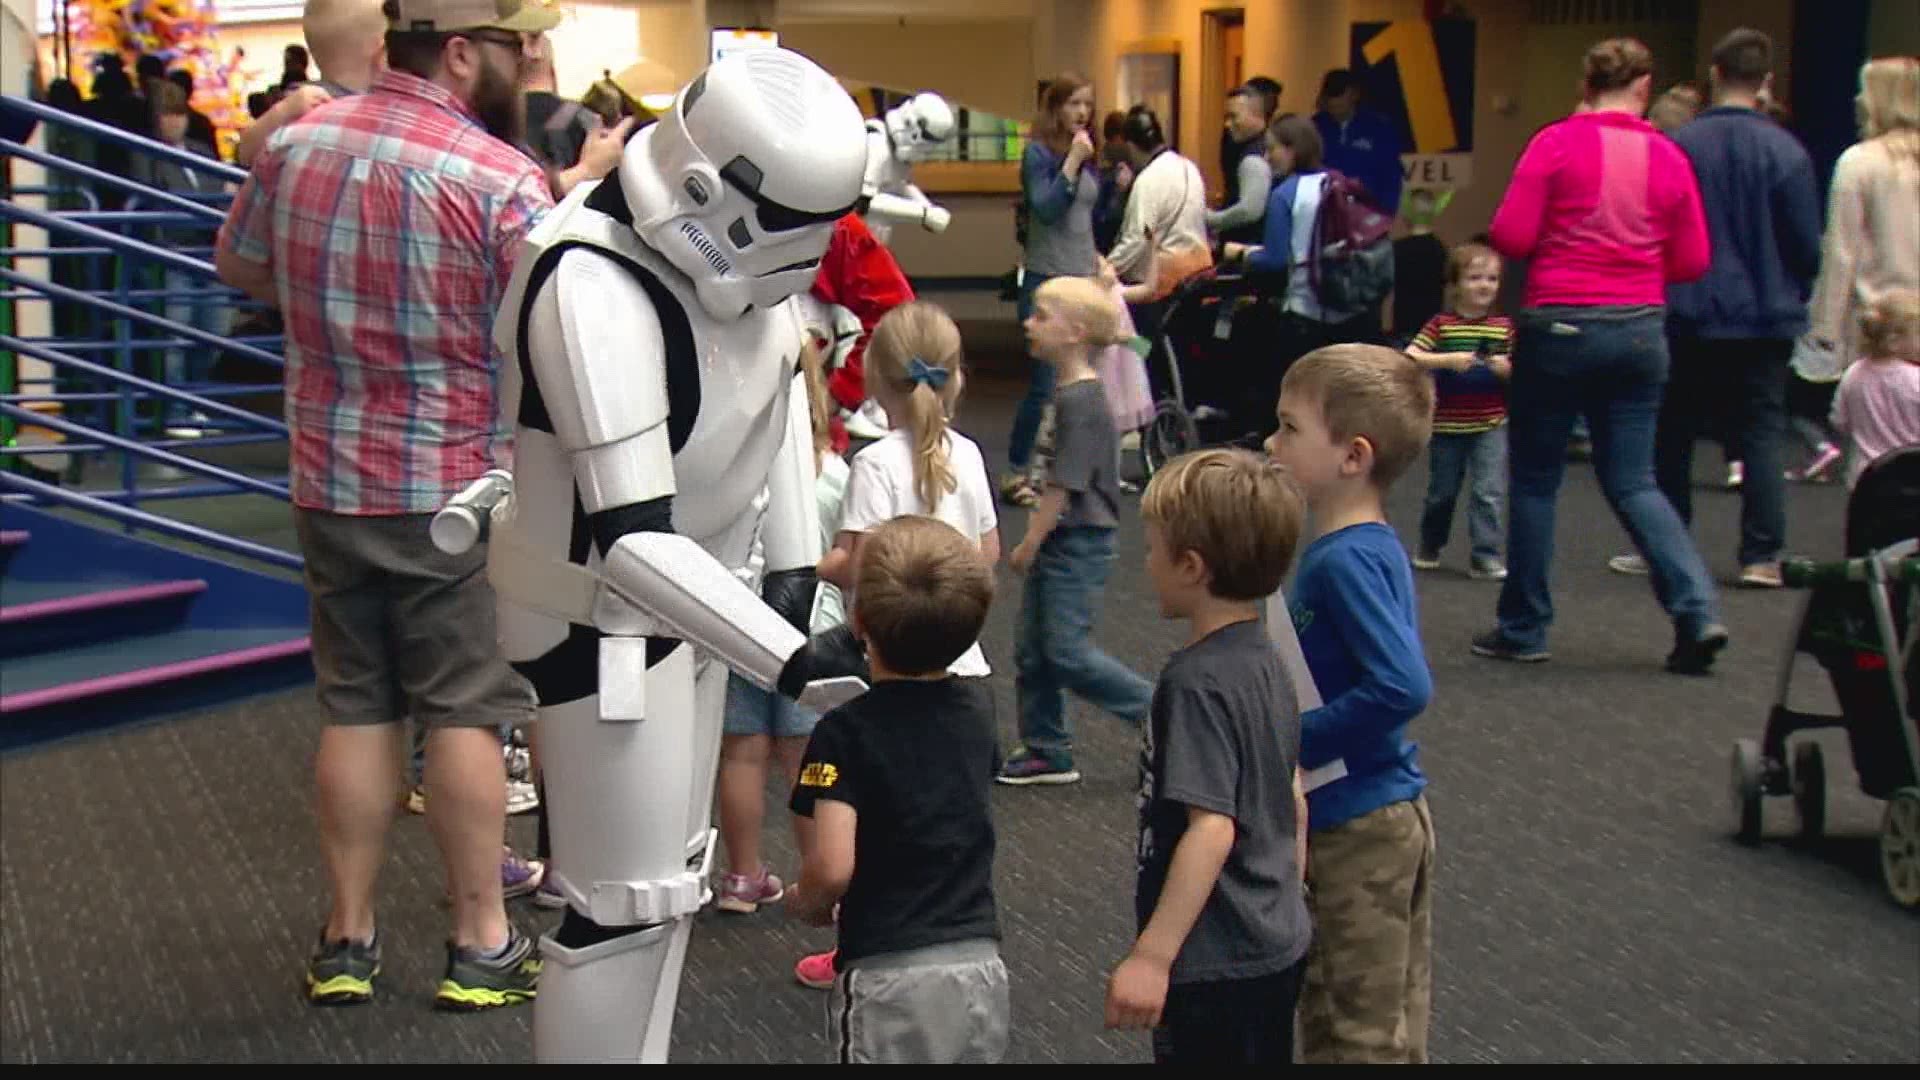 There's 'May the fourth be with you' events Tuesday at the Children's Museum